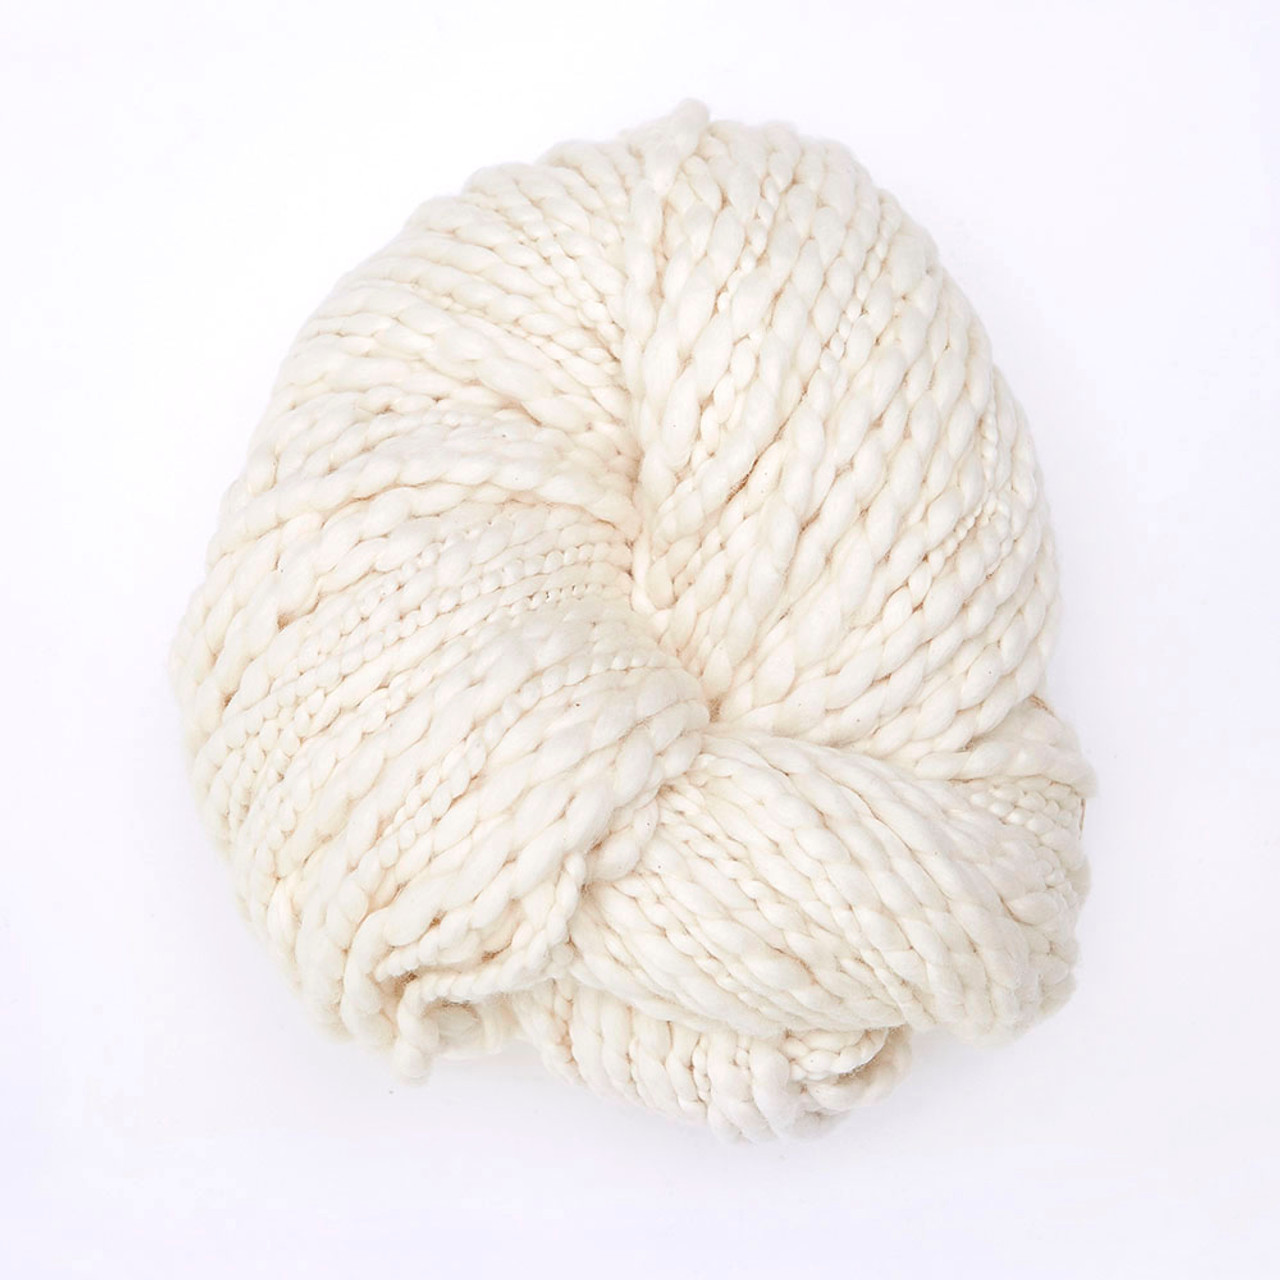 Kinua Flame - Peruvian 100% Organic Cotton Yarn Certified GOTS Undyed  Natural Color 100 Grams Bulky Weight